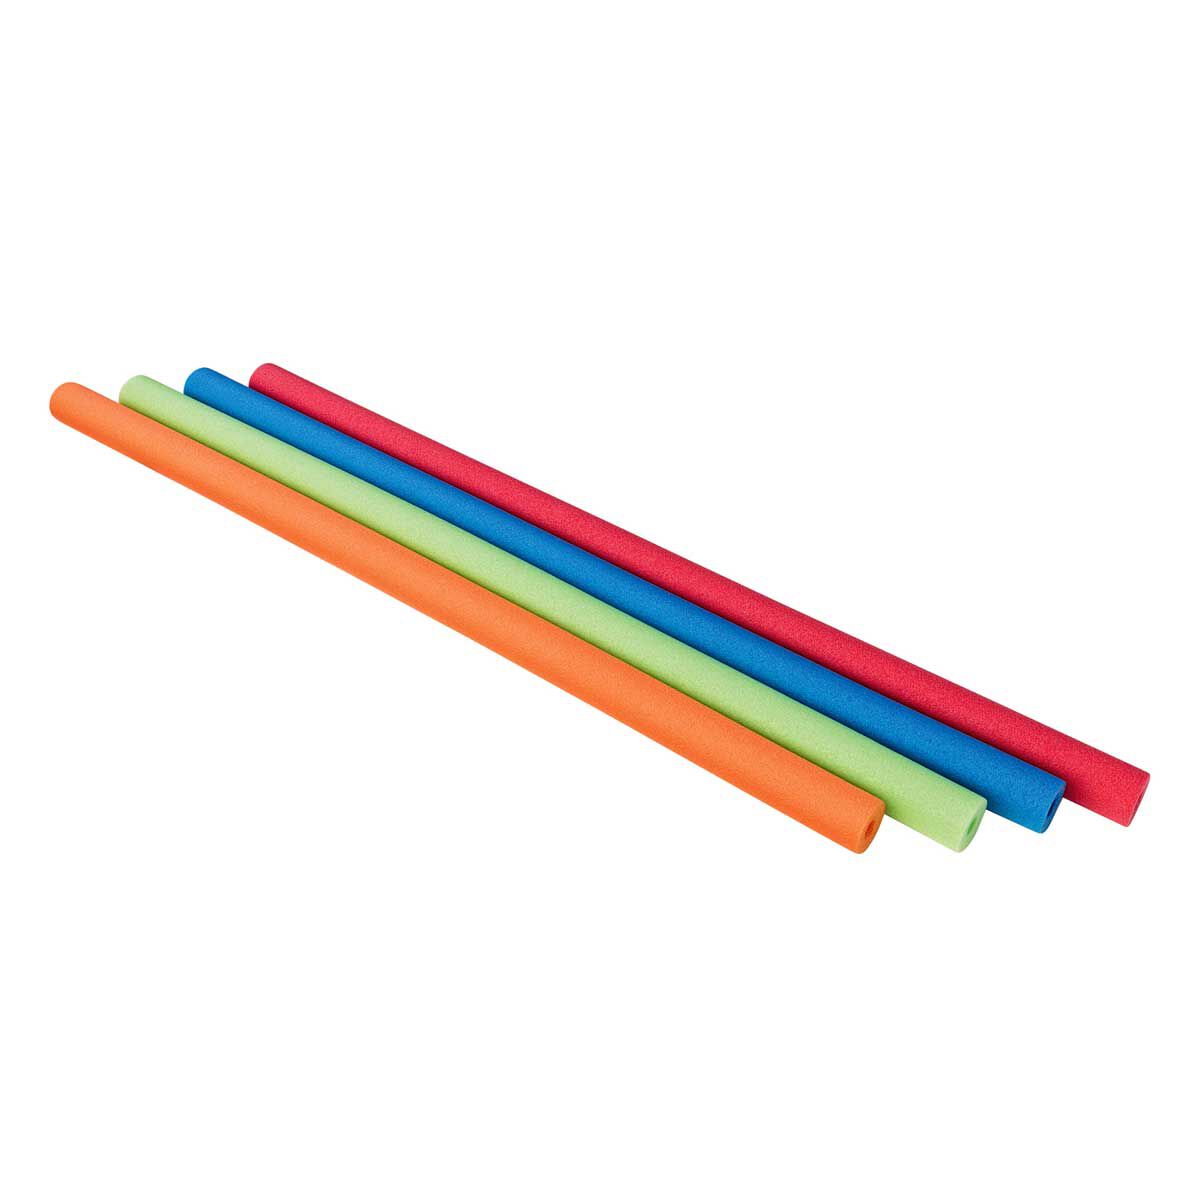 Oodles of Noodles Jumbo Sliders Pool Noodles That Connect 3 Pack Assorted Colors 